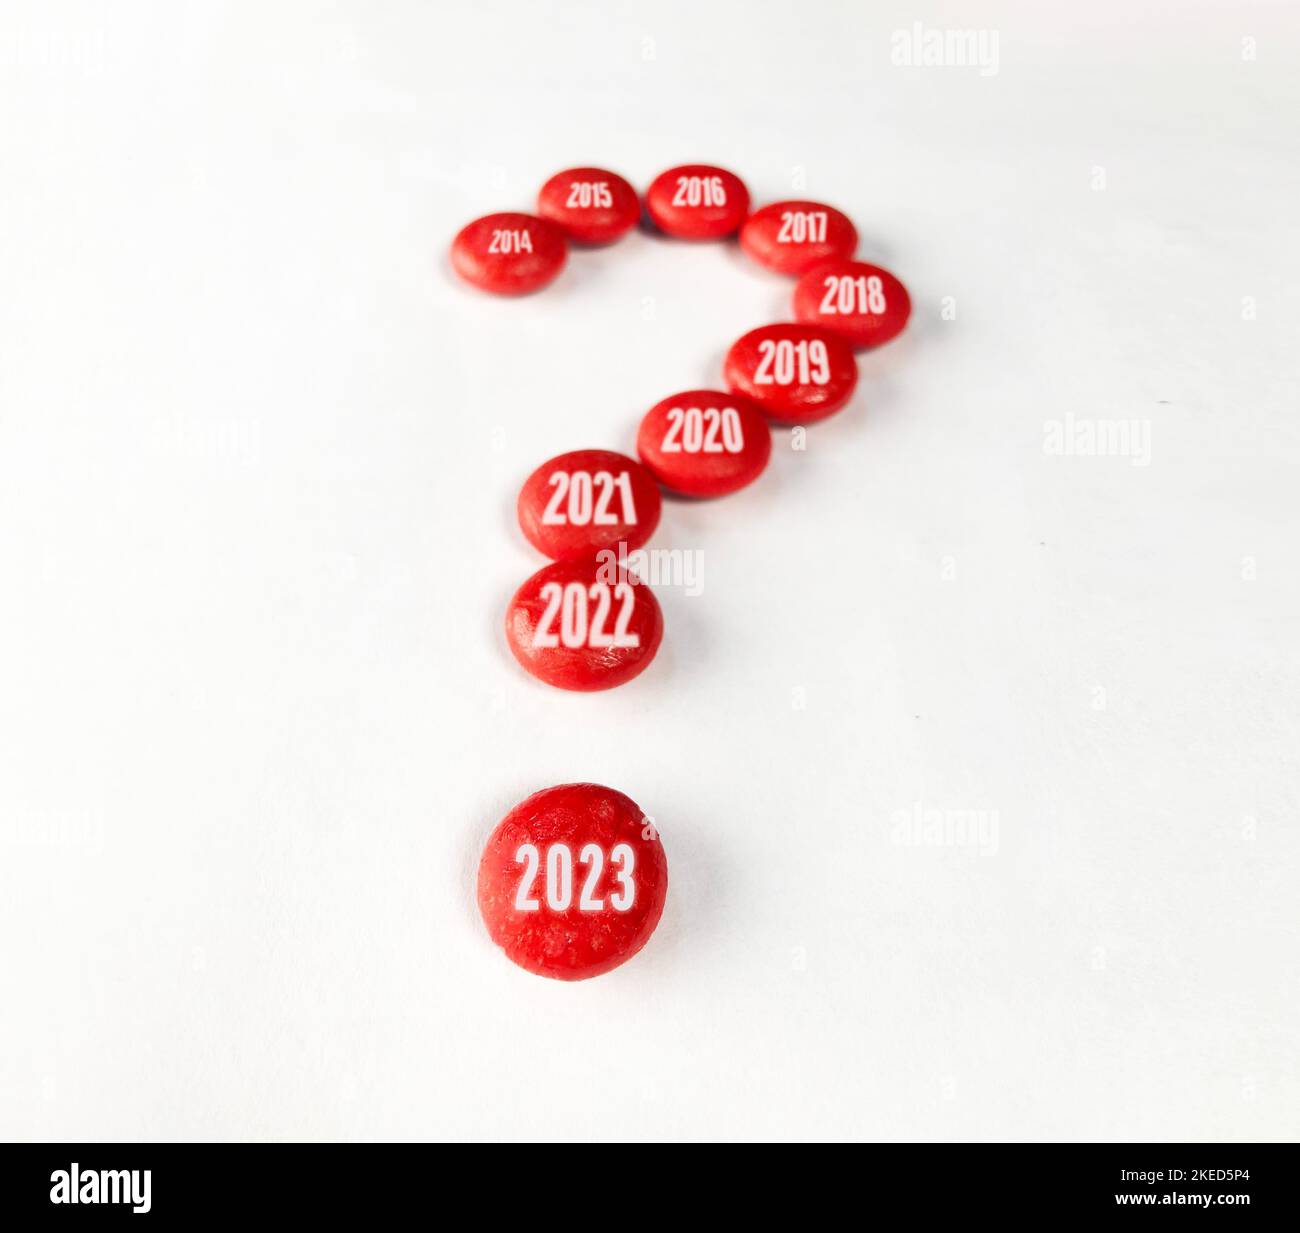 2023 new year concept with red question mark. 10 years of question marks from 2014 to 2023. Stock Photo